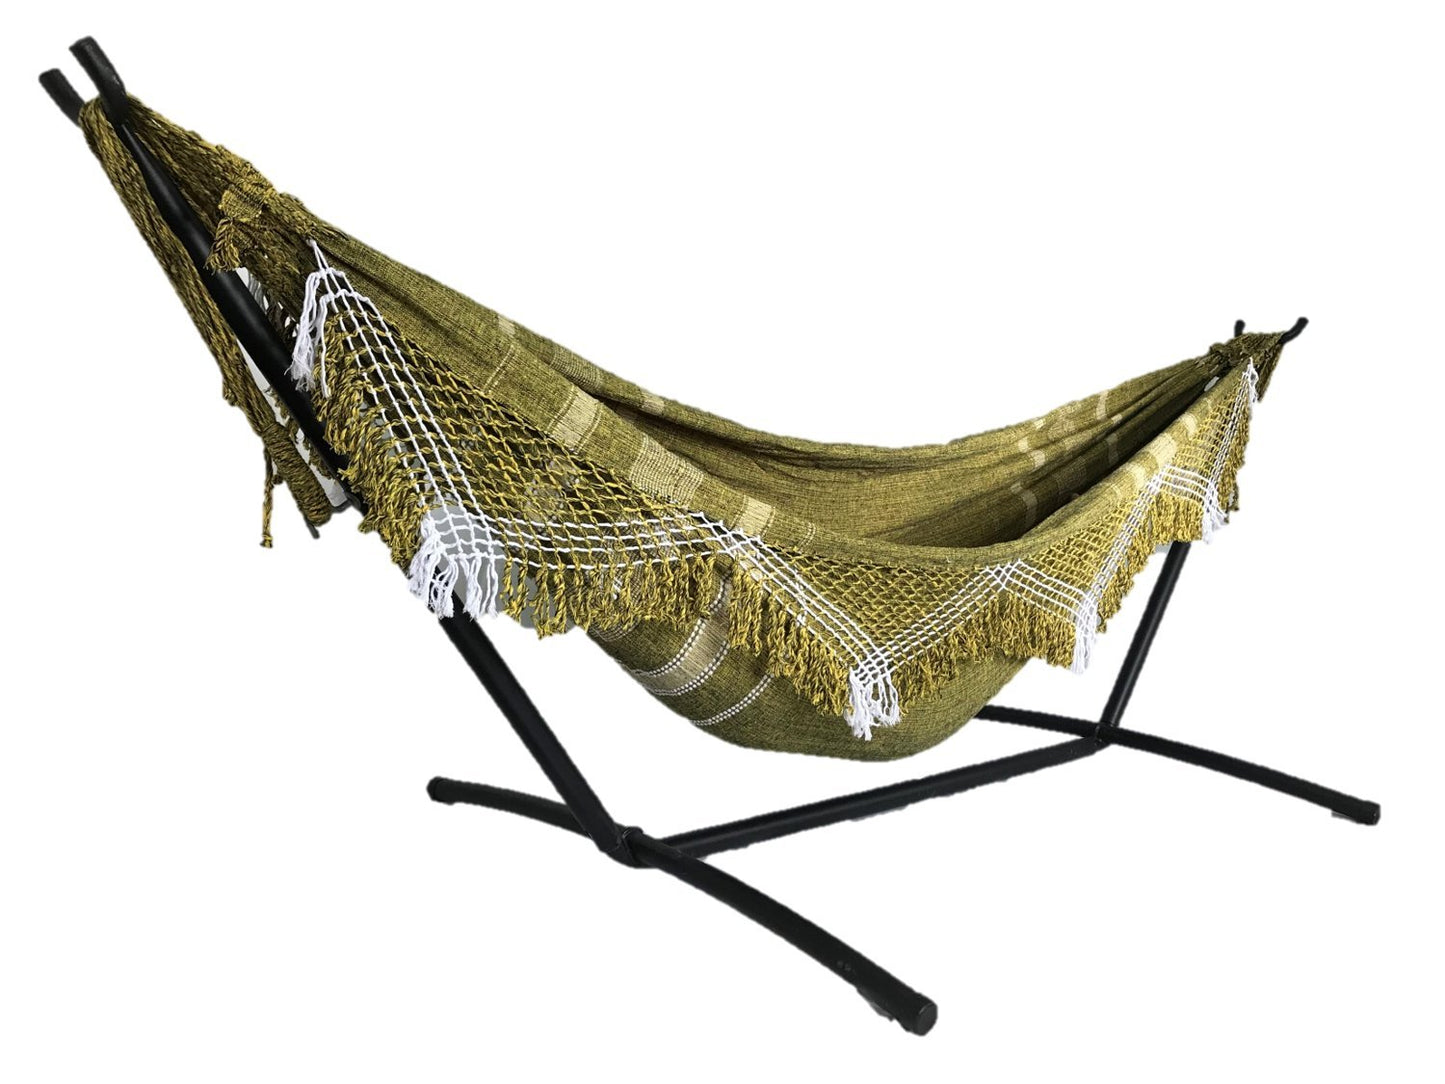 Coco Bromelia Brazilian Hammock with Fringe with Bonus Bag - 100% Soft and Stretchy Cotton from (Pineapple)